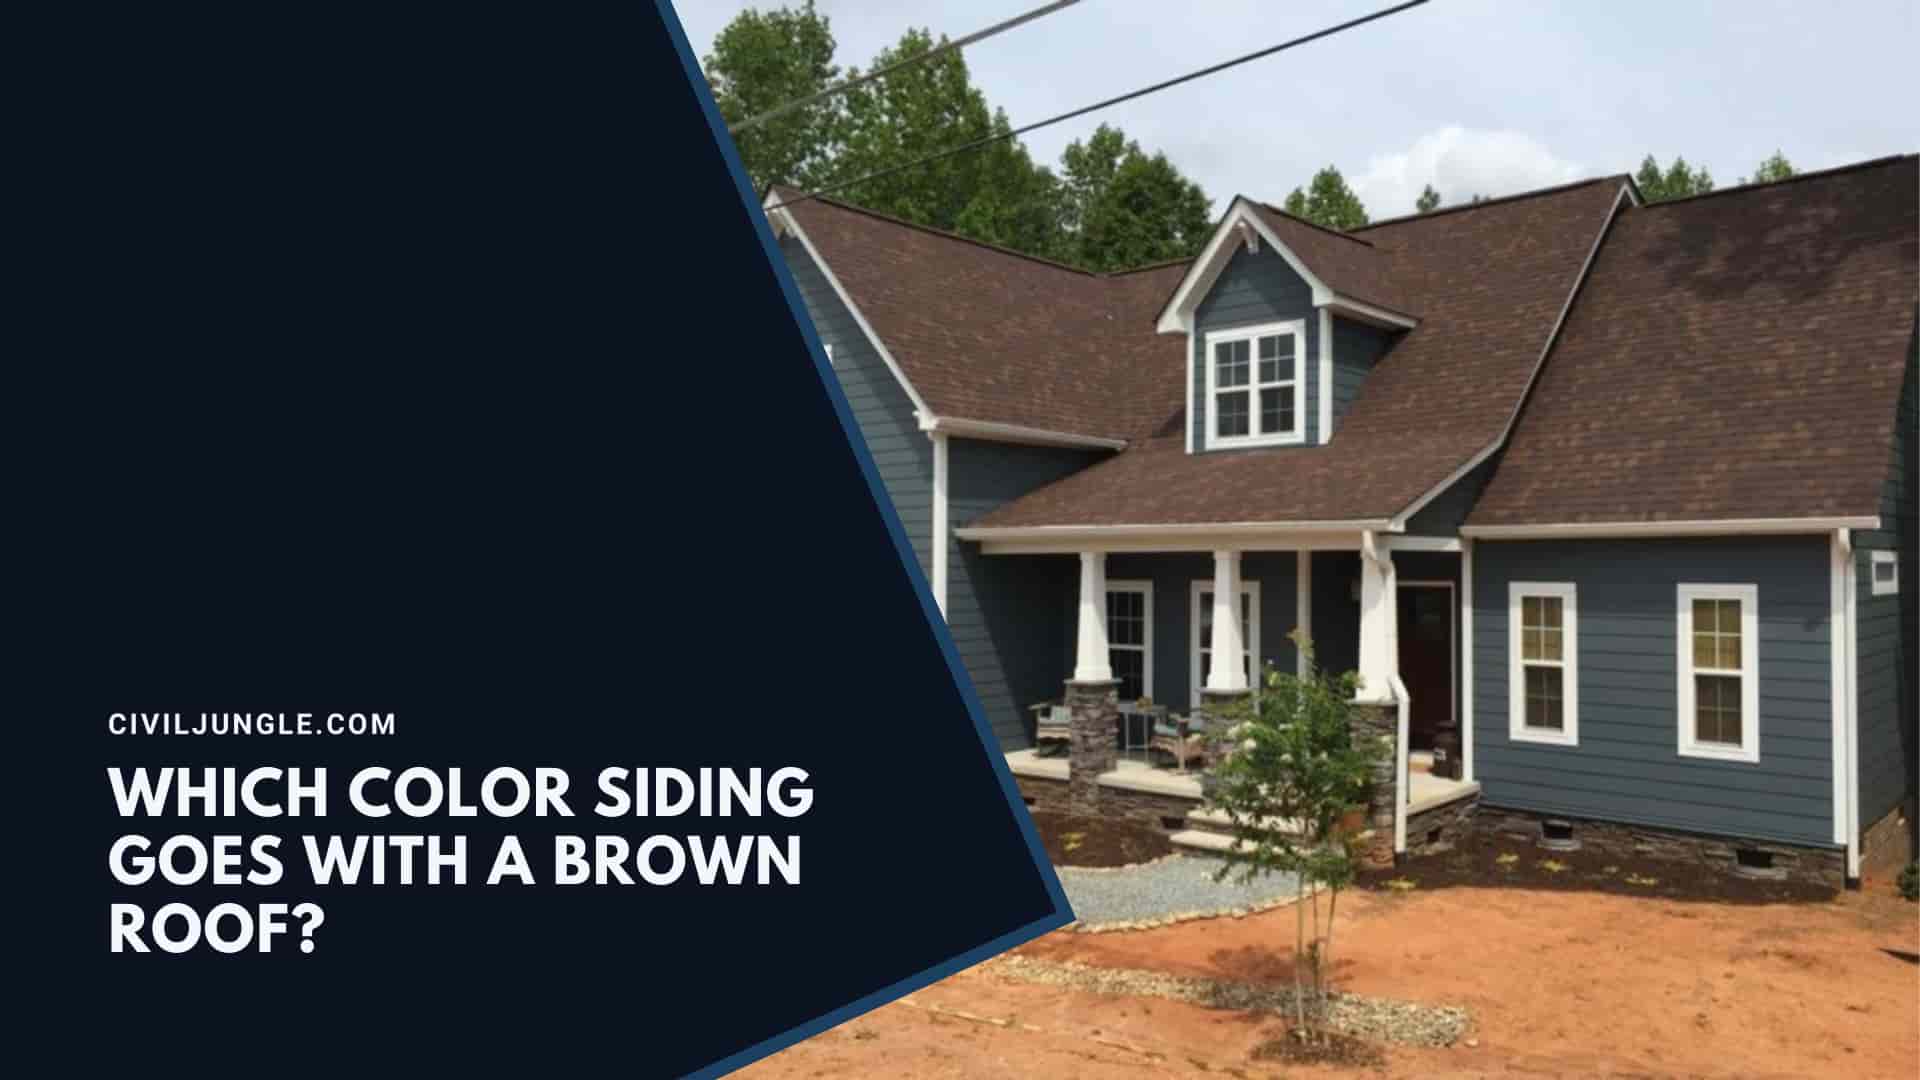 Which Color Siding Goes With A Brown Roof?